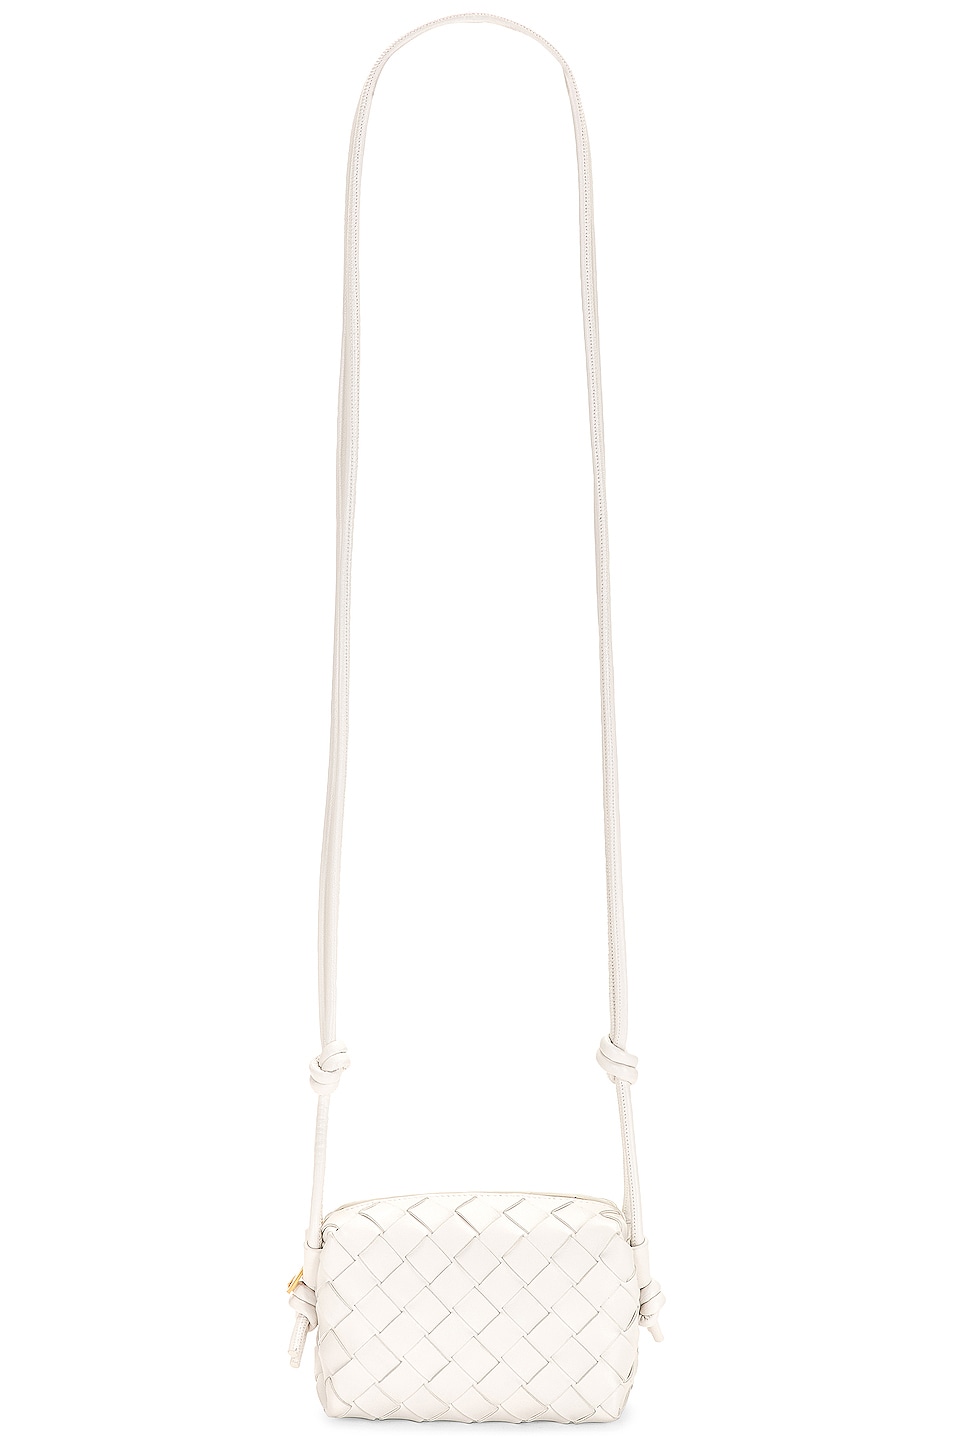 Candy Loop Bag in White